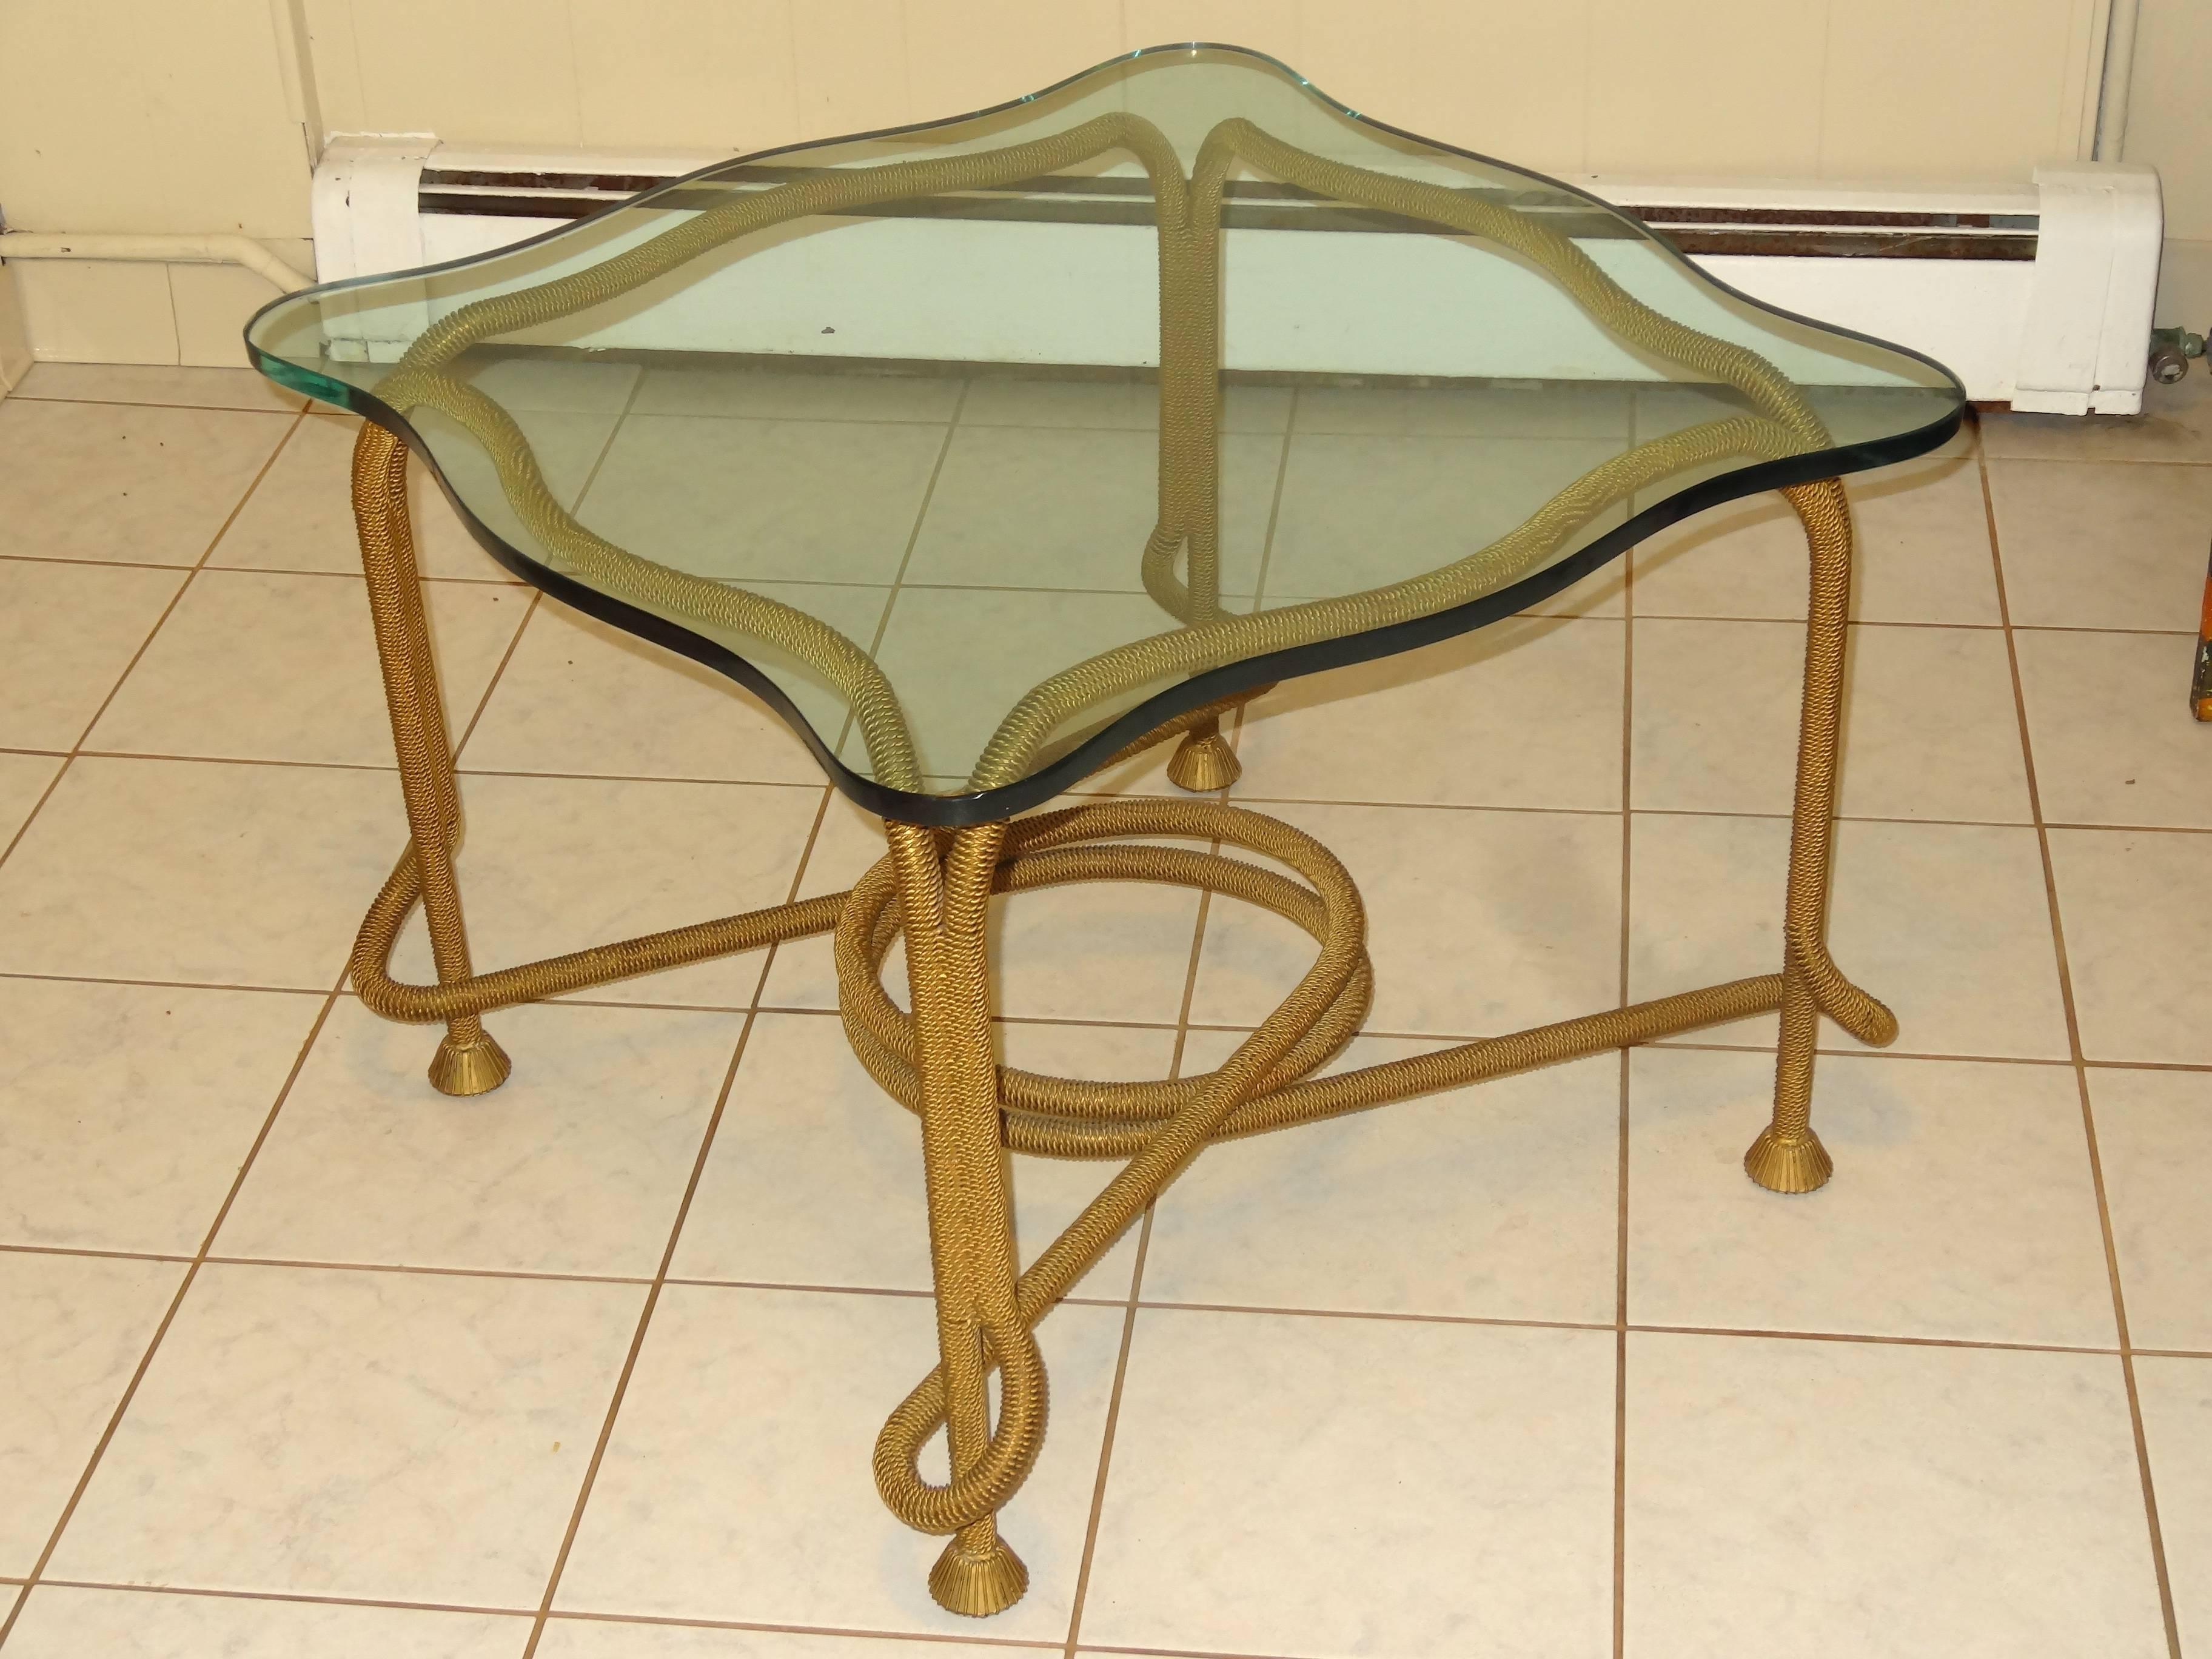 French beaded rope table. Has metal frame that is covered with brass colored metal string to make it look like rope.
Nice whimsical shape and glass top that follows the form of the rope base.